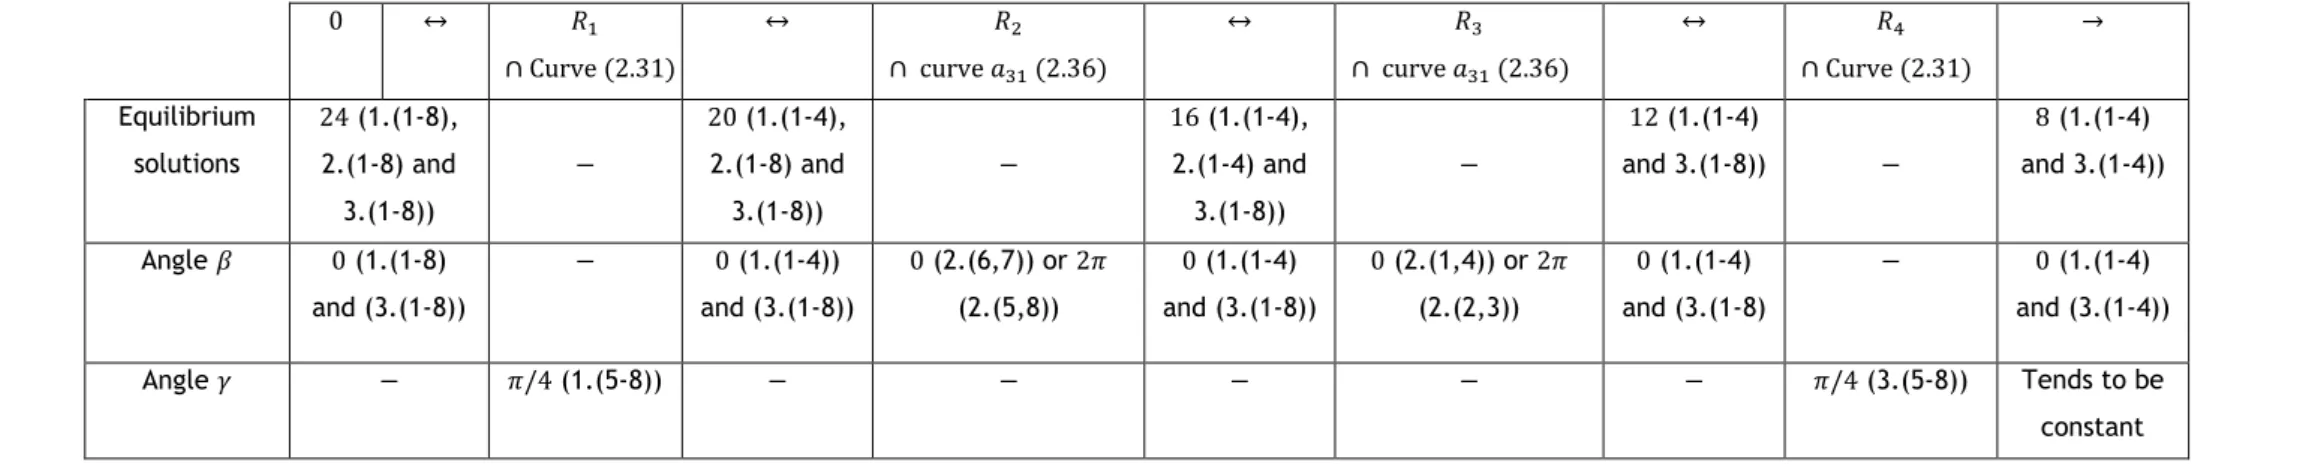 Table 3.3 – Summary of equilibrium solutions and spacecraft angles 